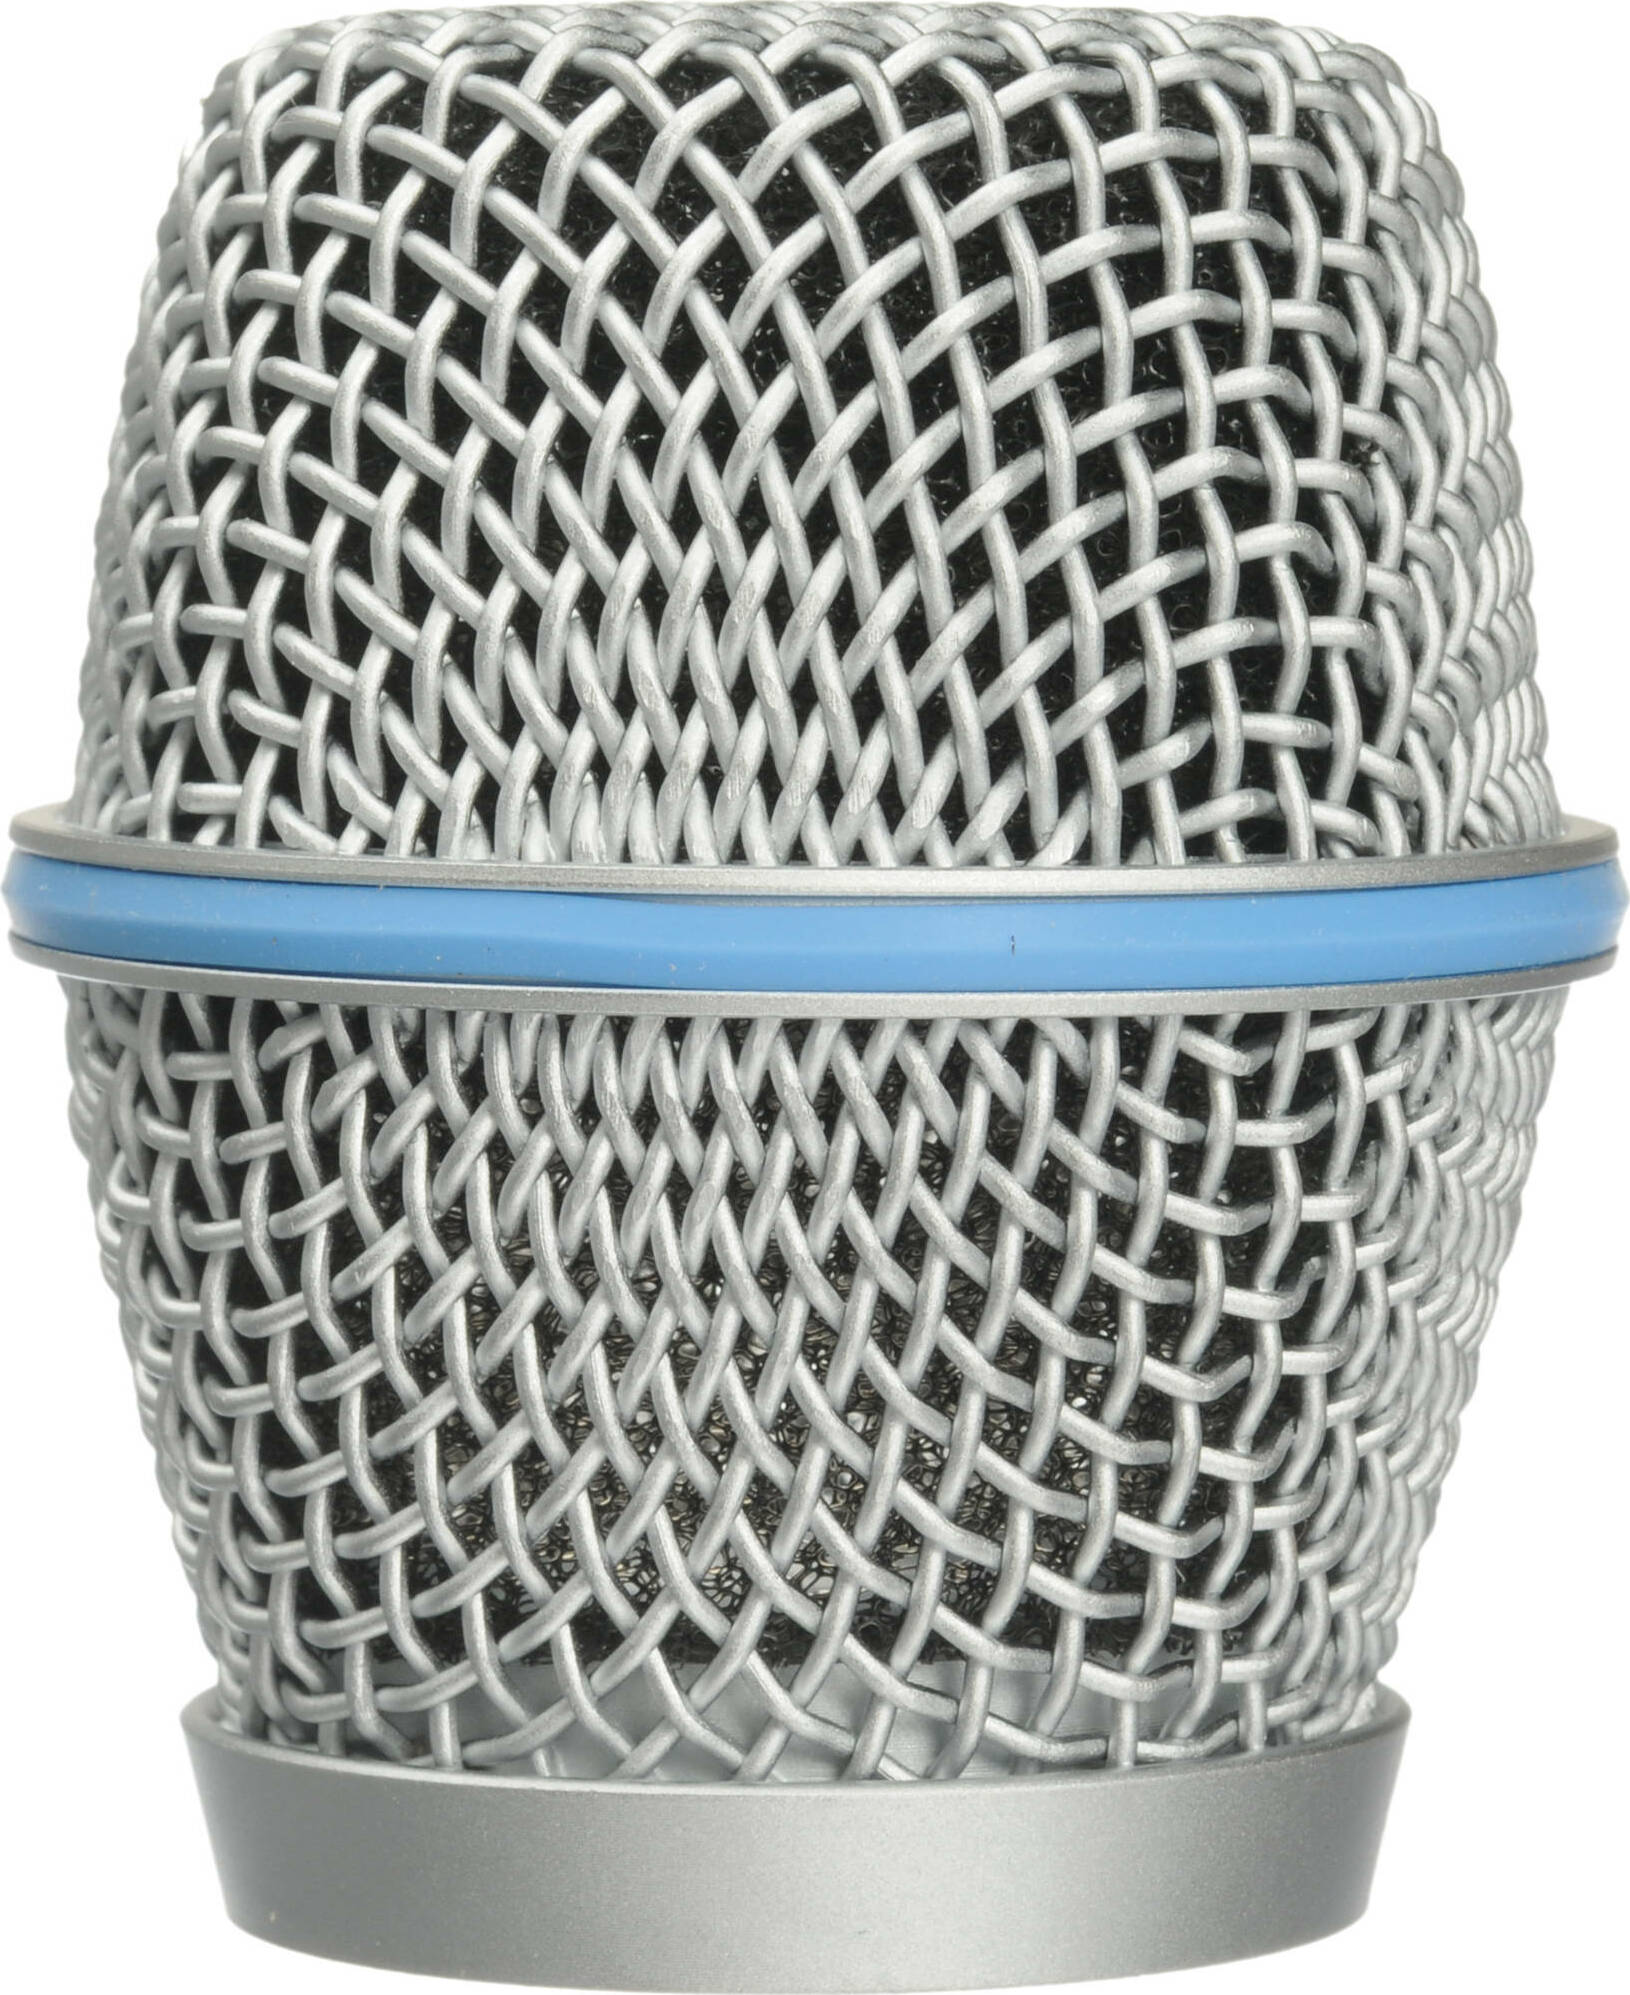 Shure Rk312 - Mic grill - Main picture